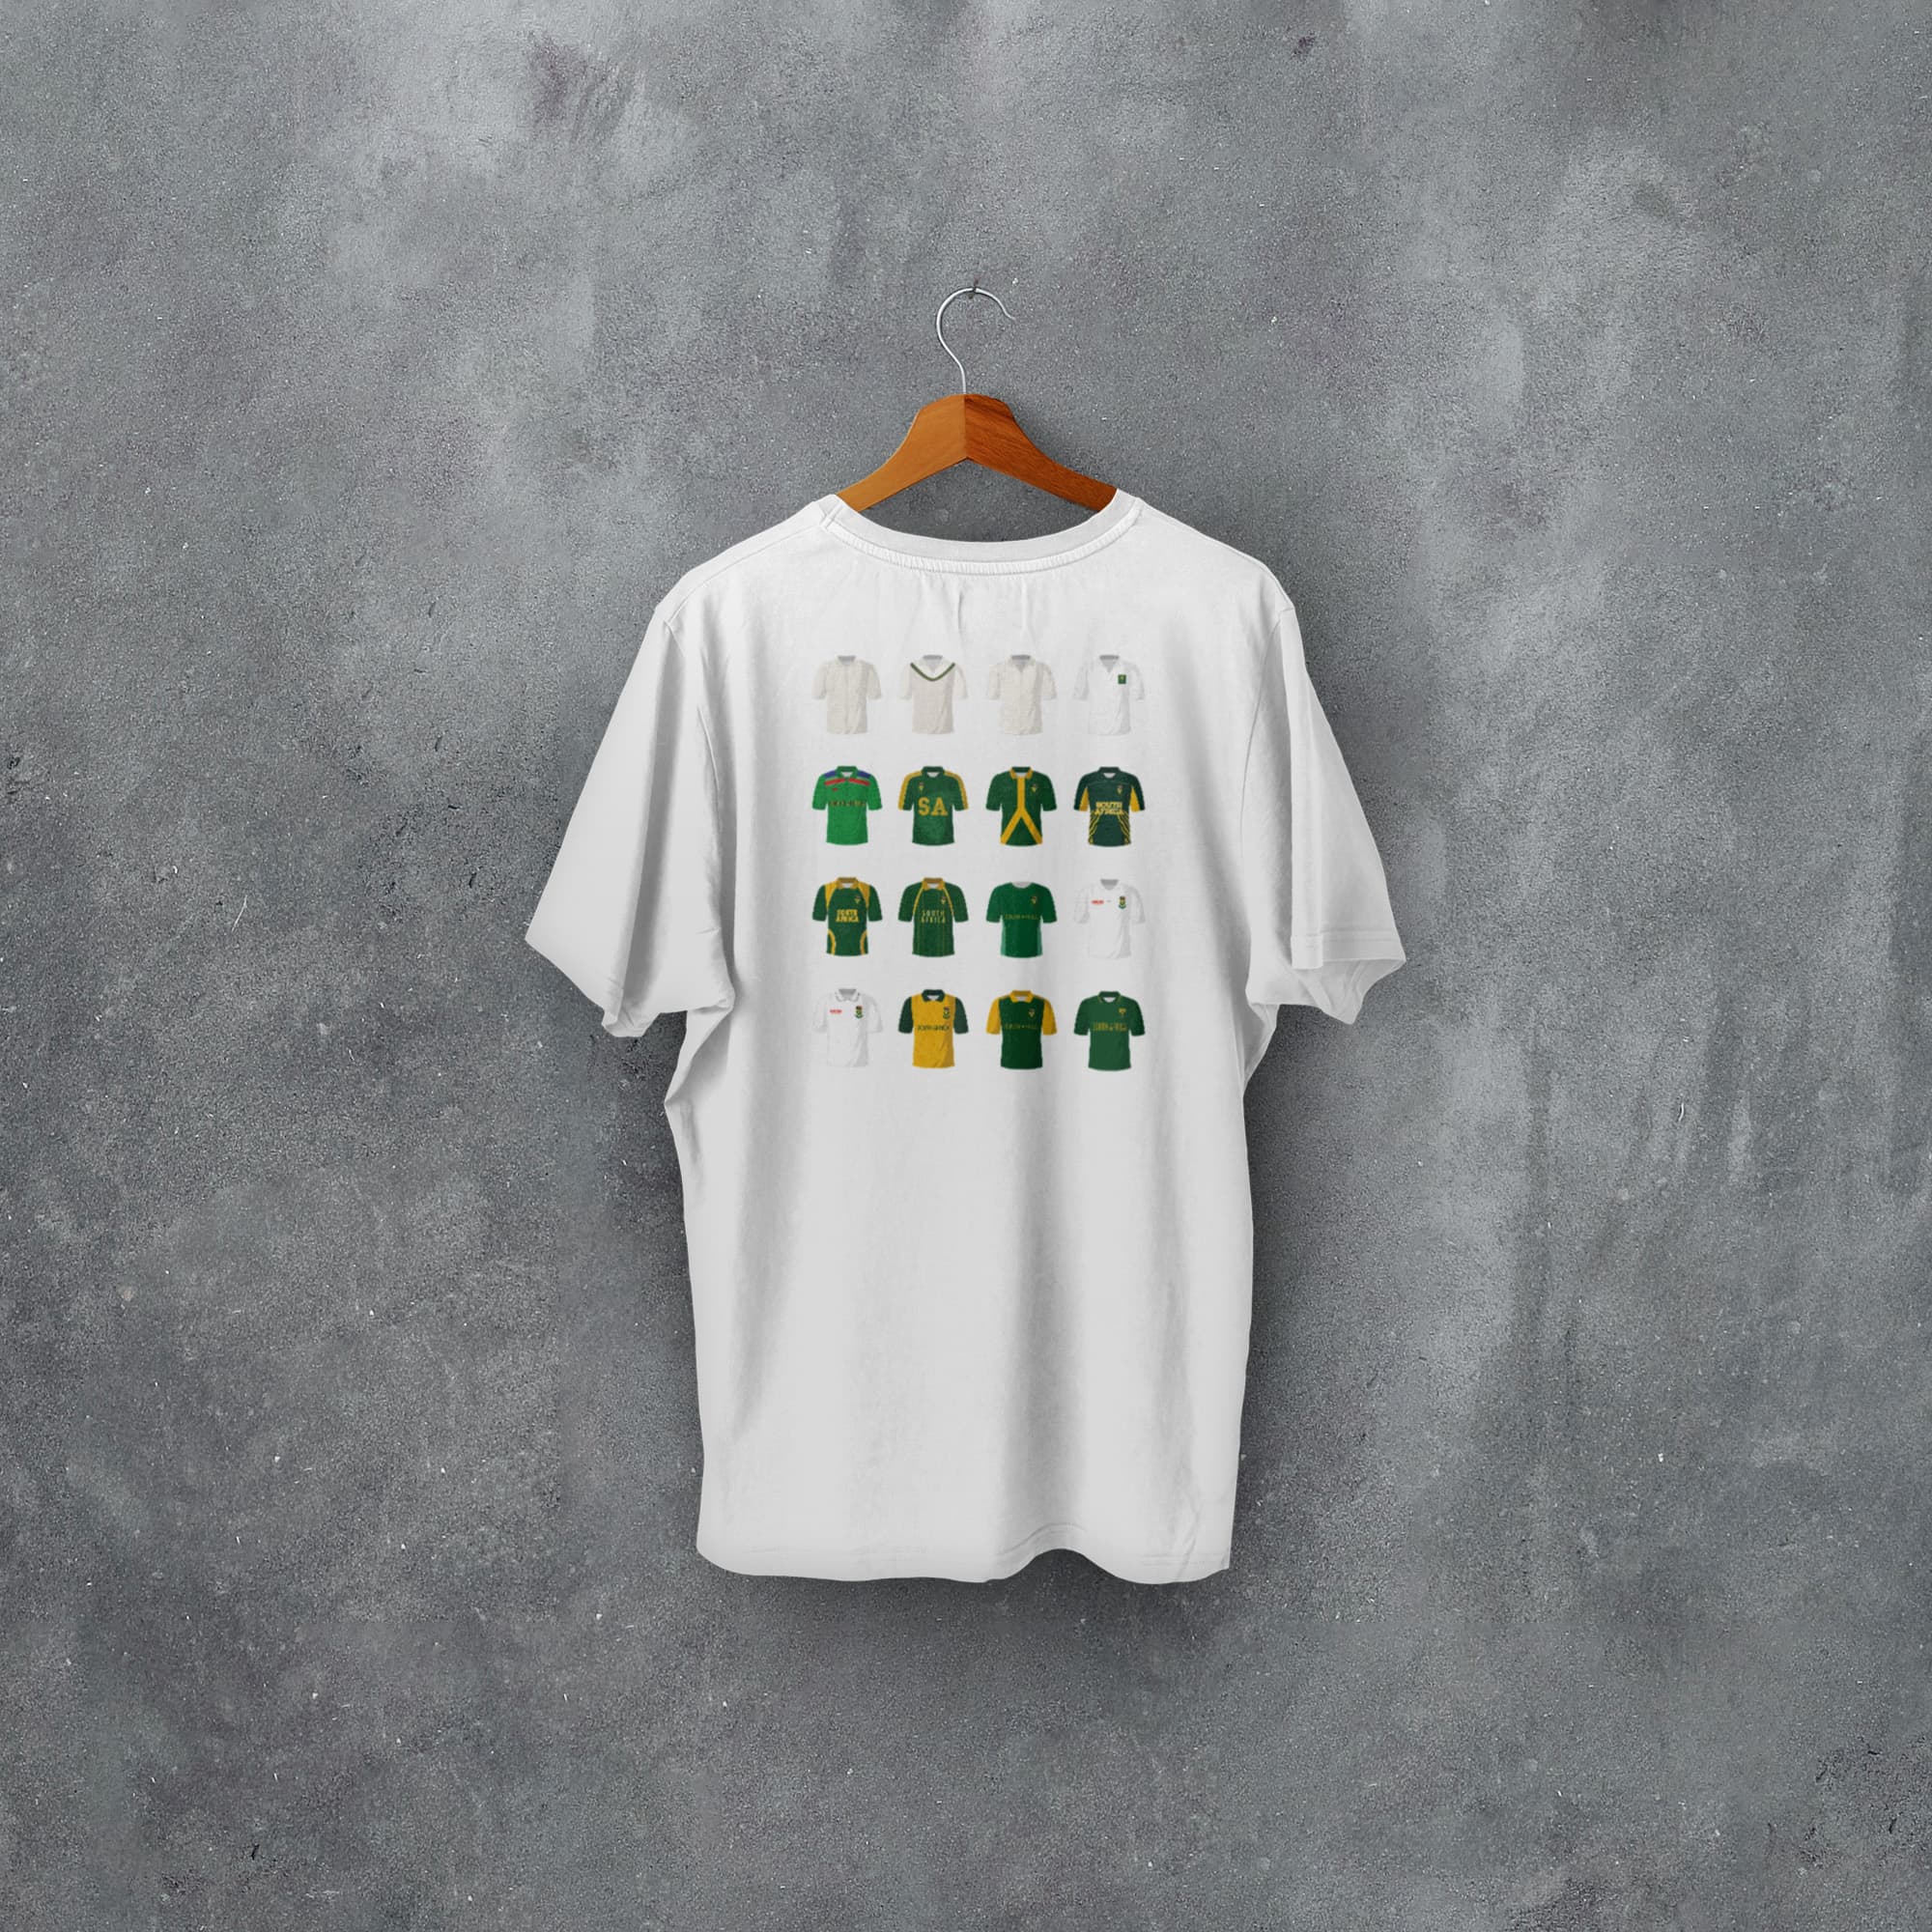 South Africa Cricket Classic Kits T-Shirt